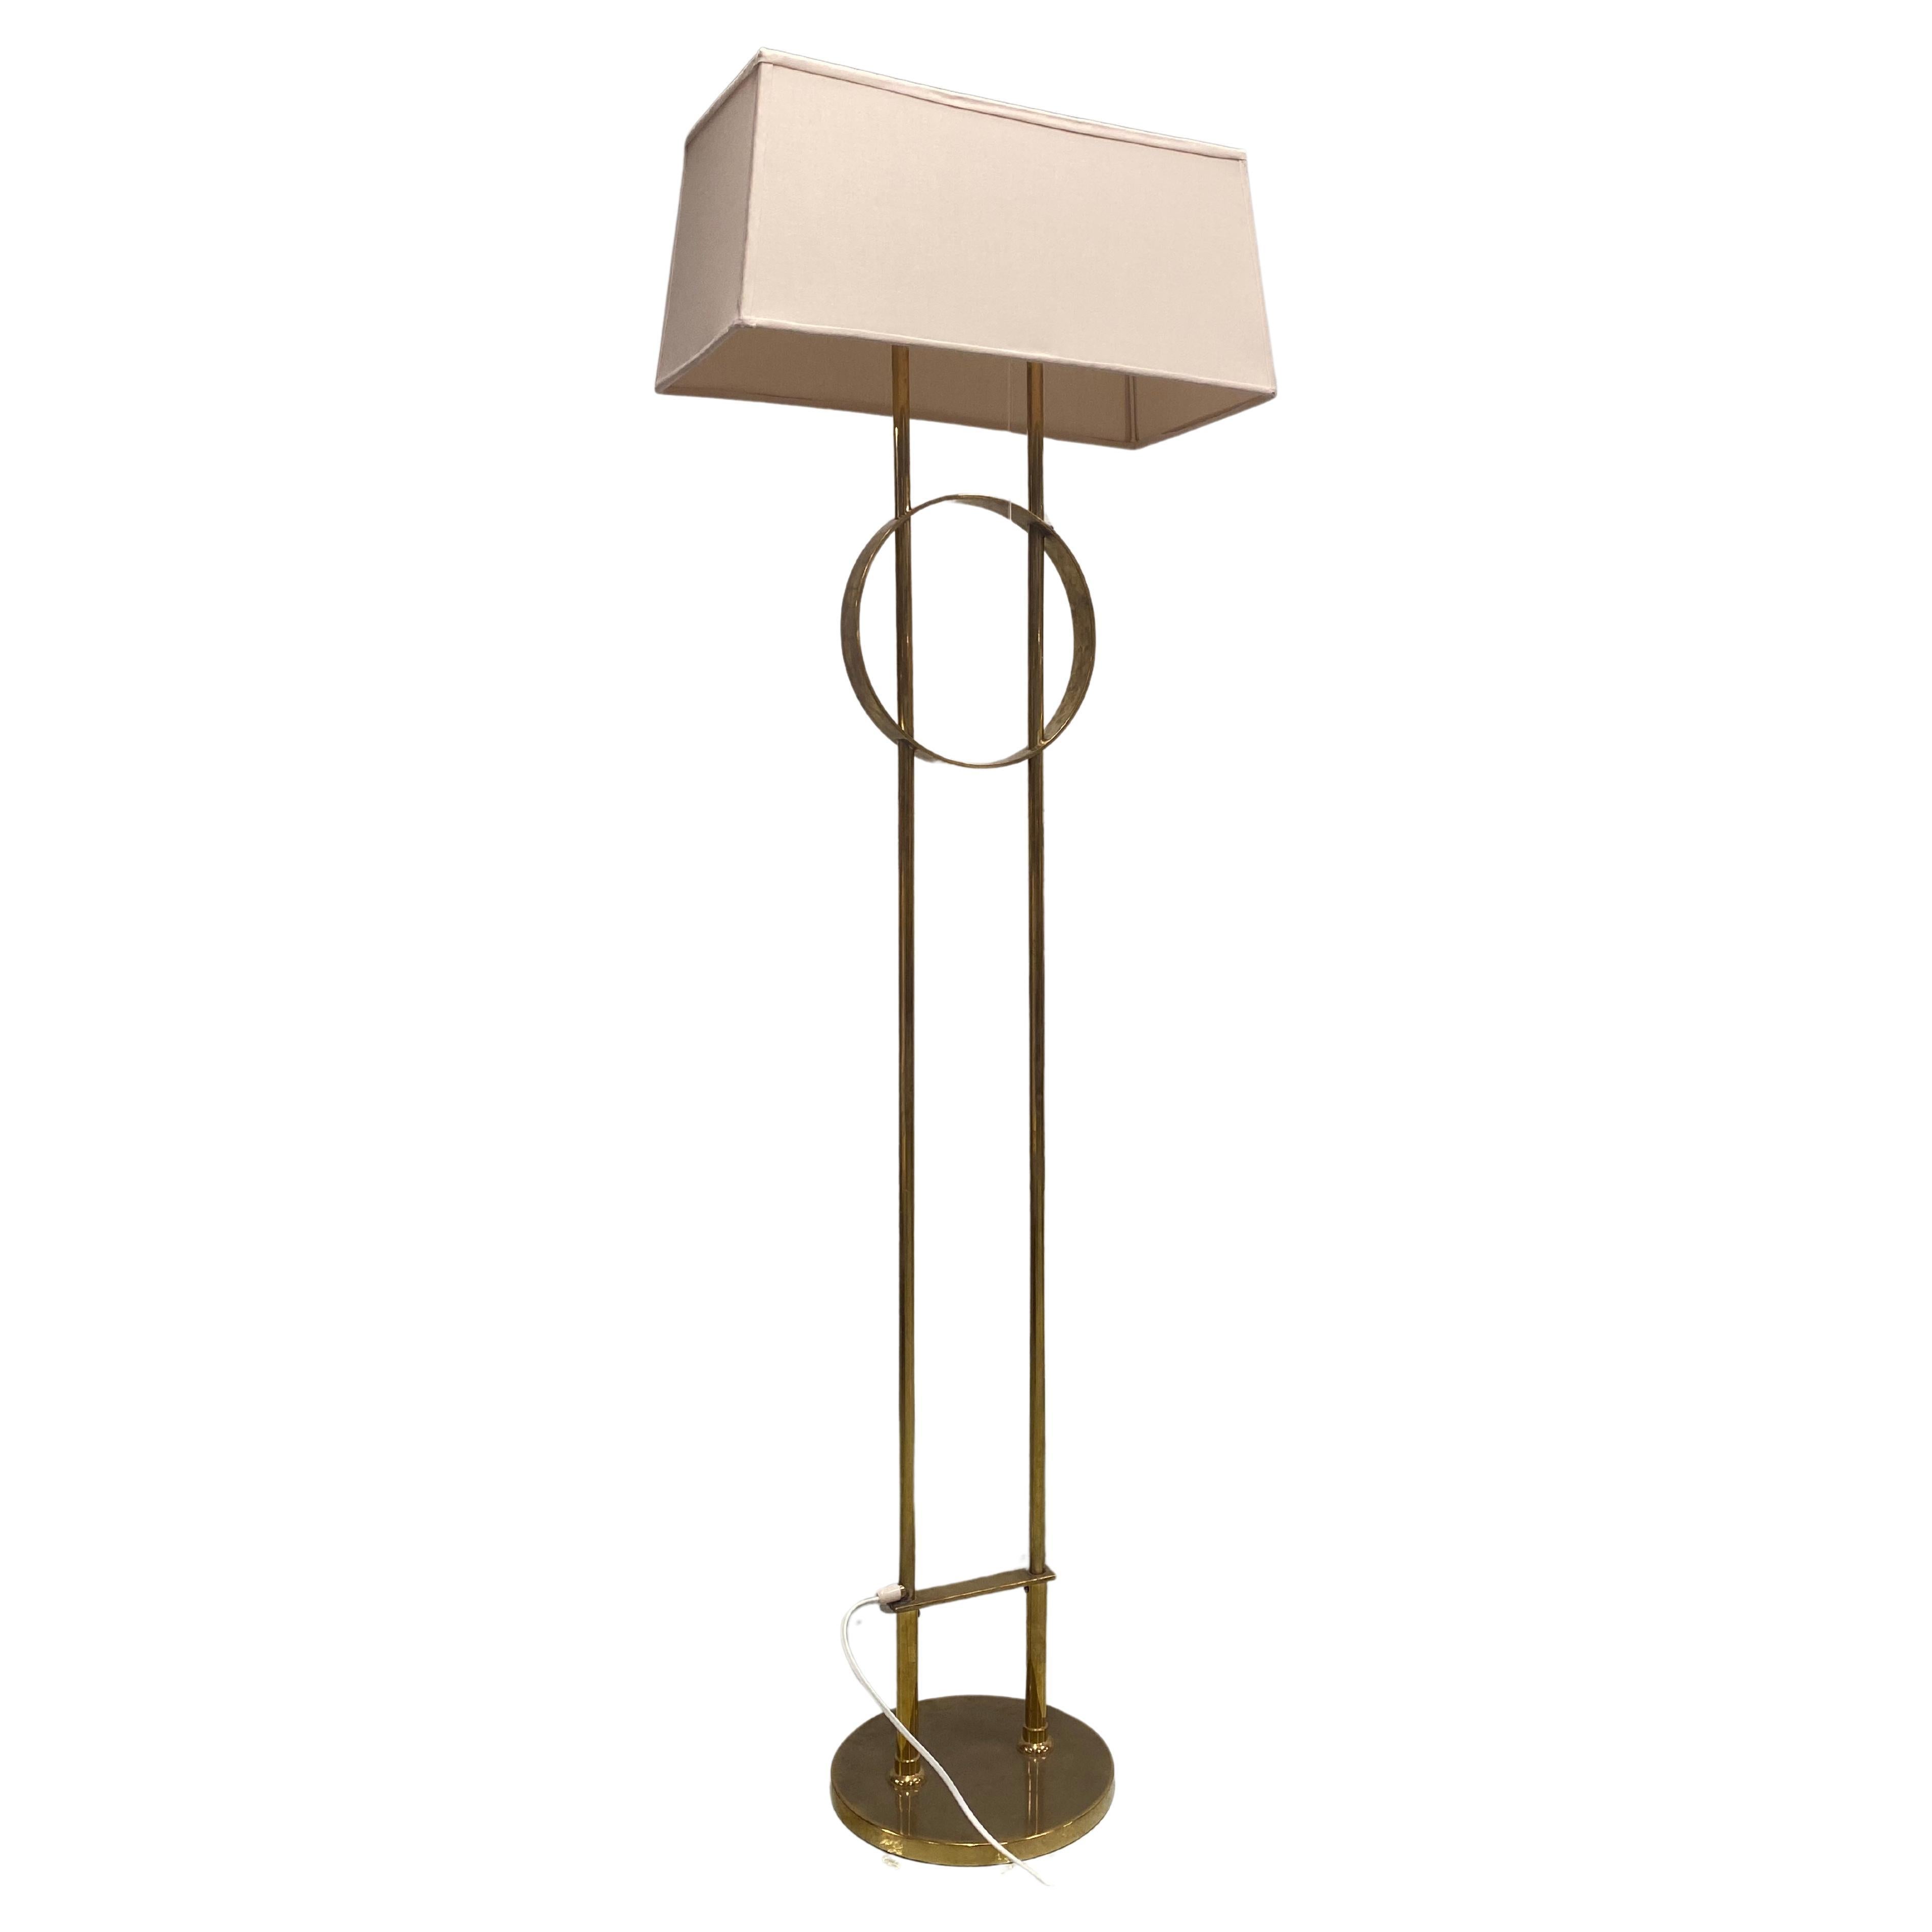 An Exceptional Commissioned Floor Lamp by Paavo Tynell, Taito